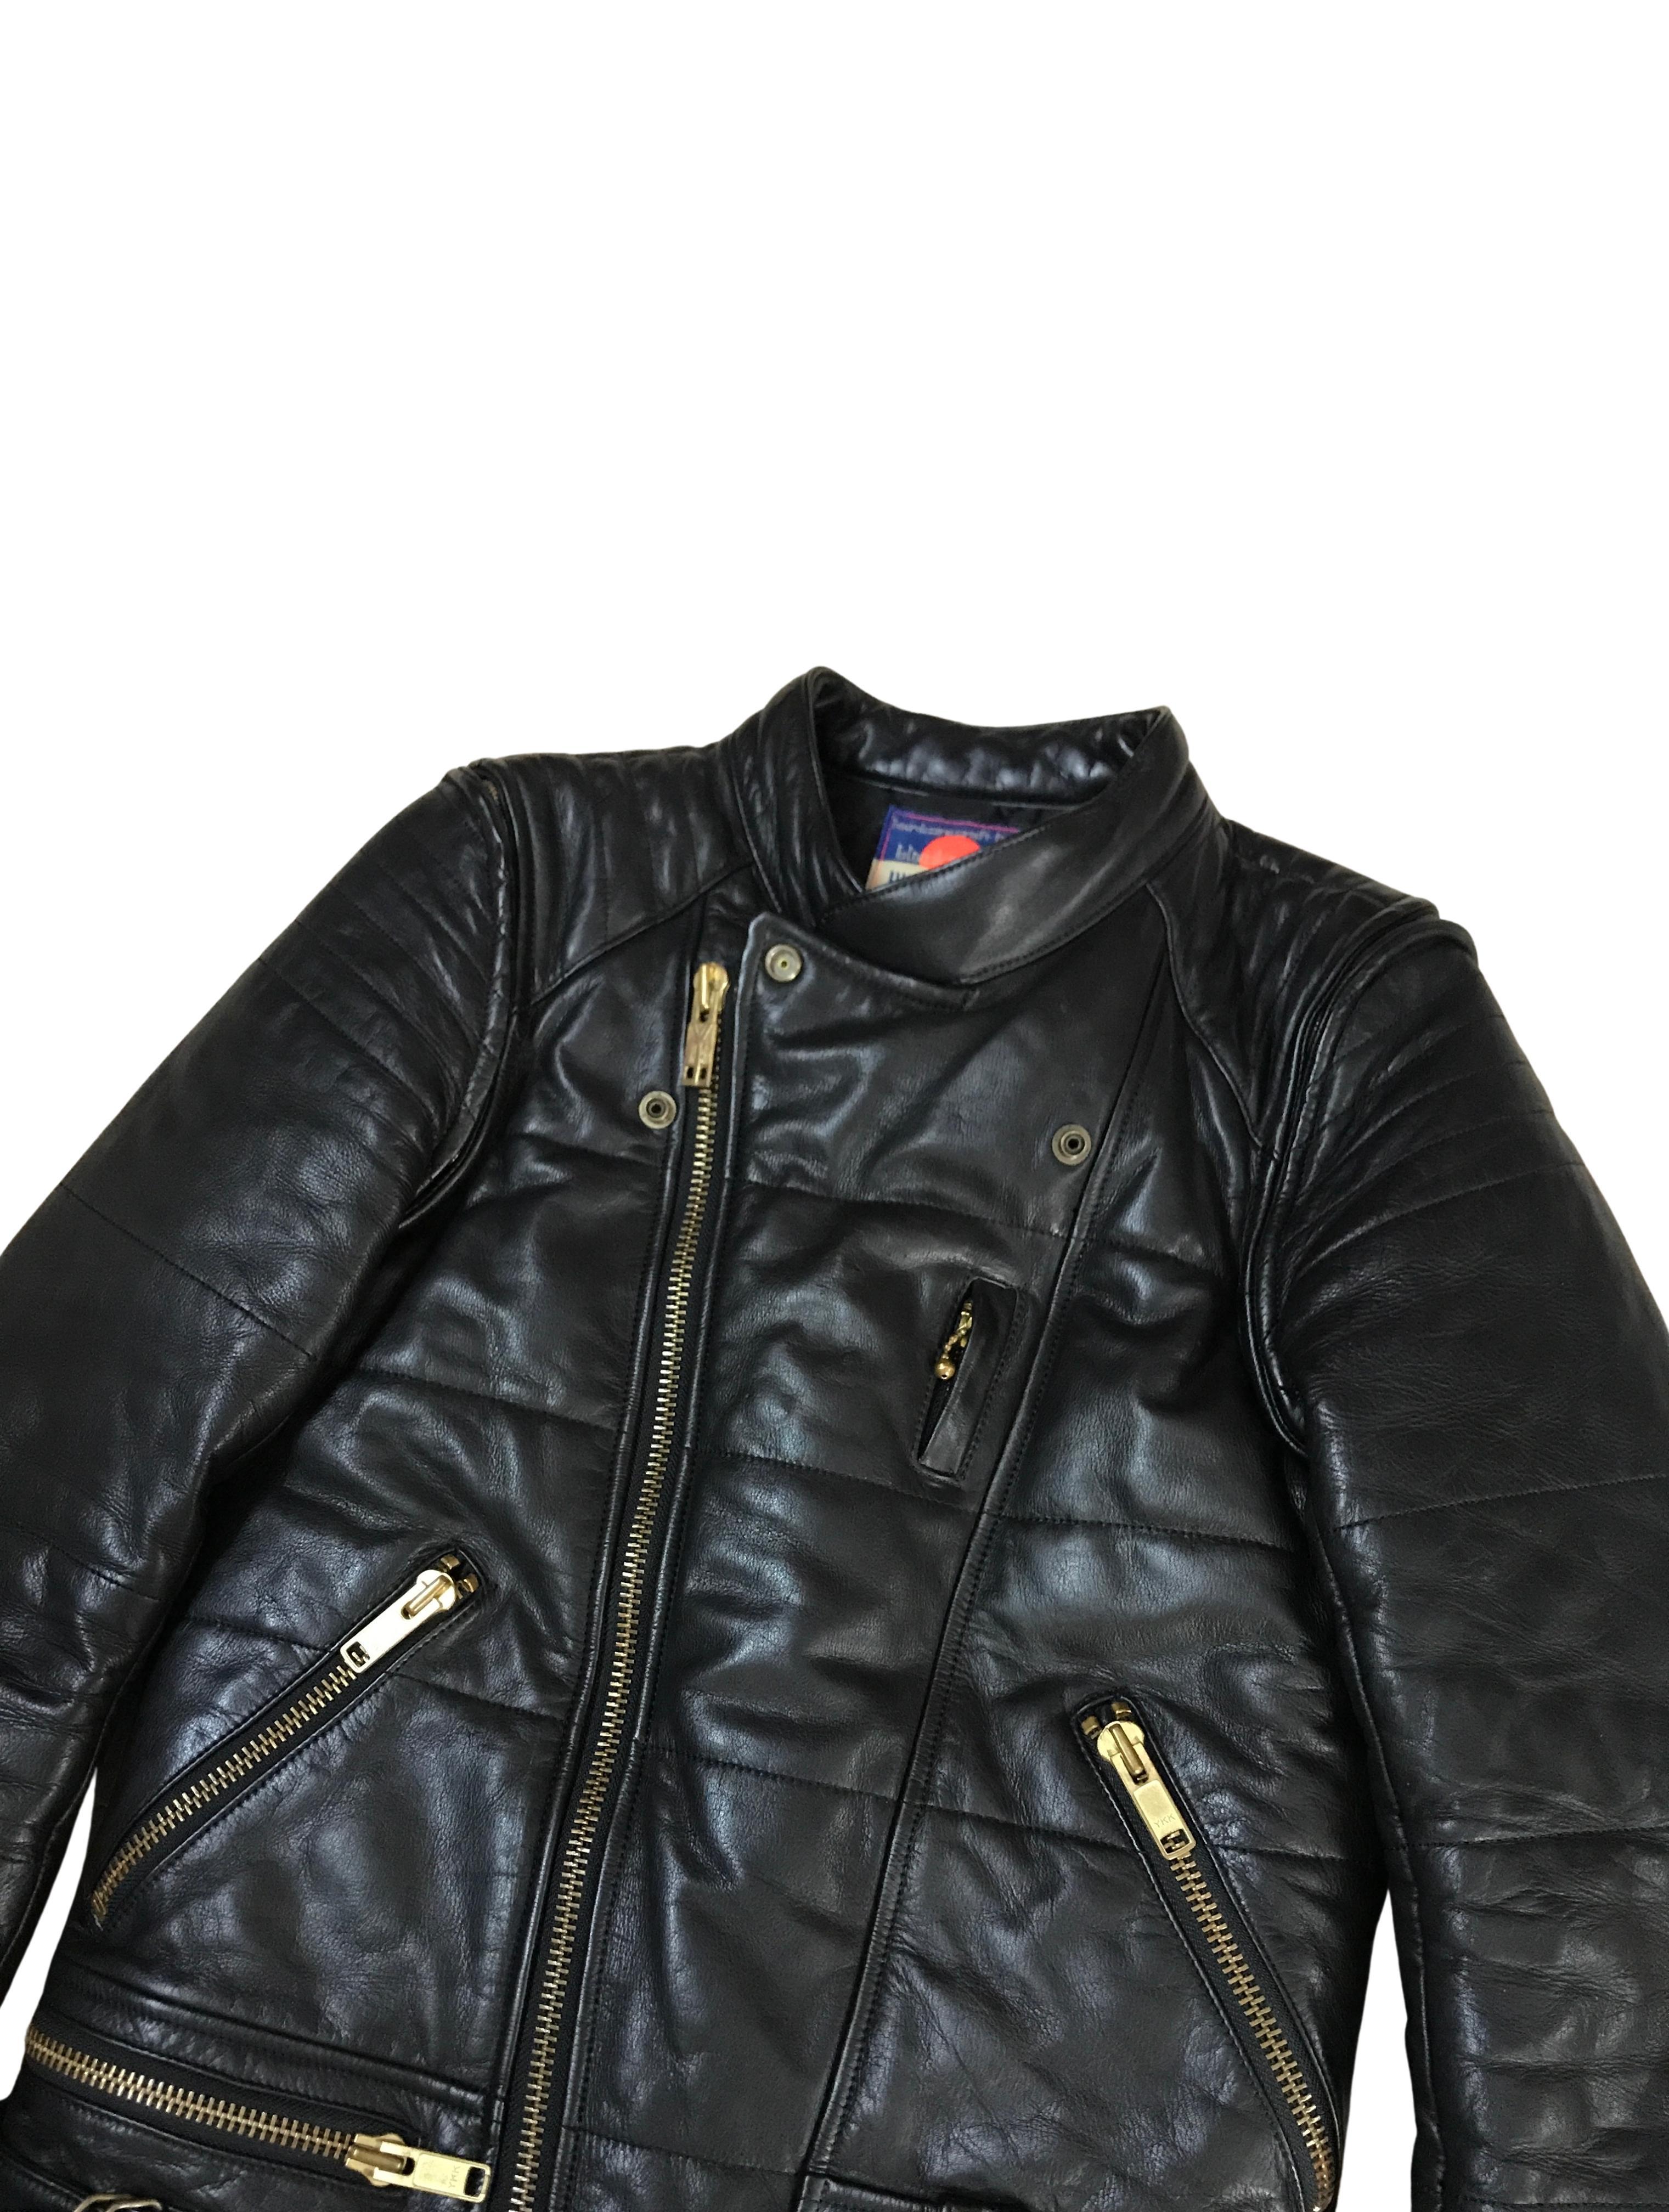 Blackmeans is the bold definition of leather excellent and was among some of those upcoming Japanese brand taking over the fashion scene (Kapital, Blackmeans, Visvim). Recently Blackmeans has a collaboration with Alyx.

Size: not included, but fits